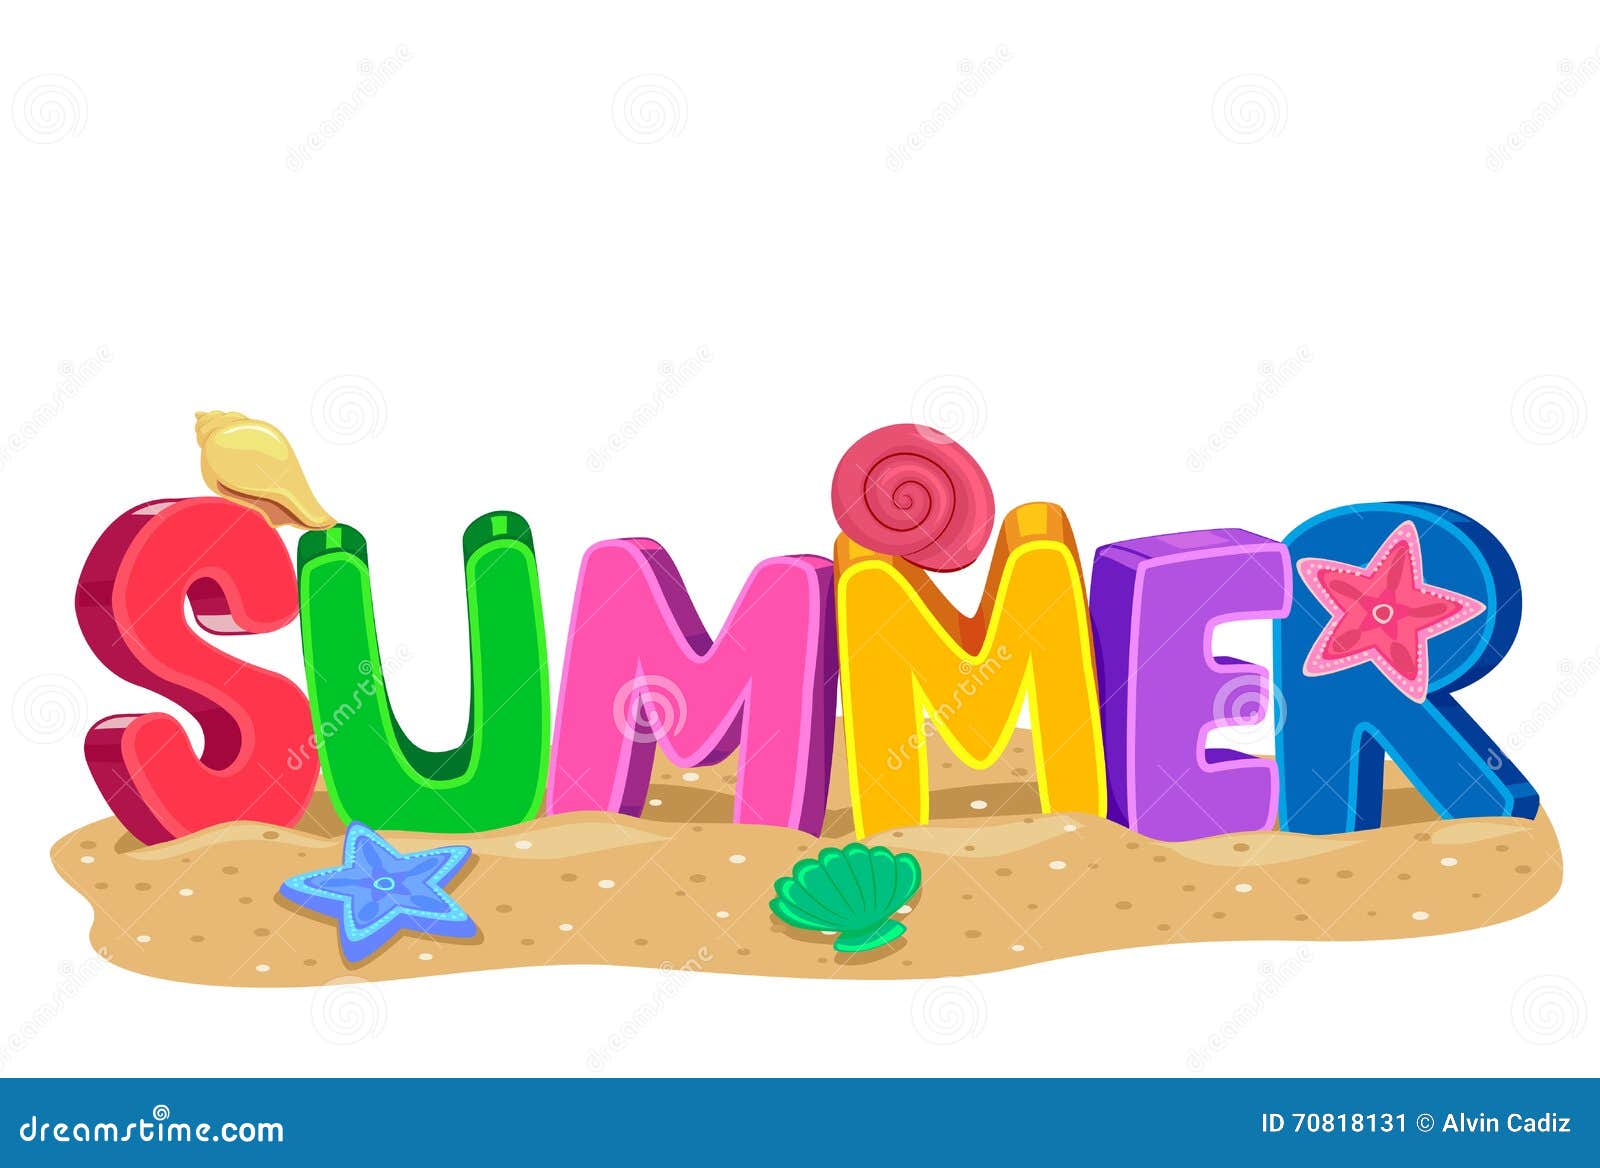 Summer 3D Letters With Elements Stock Vector ...